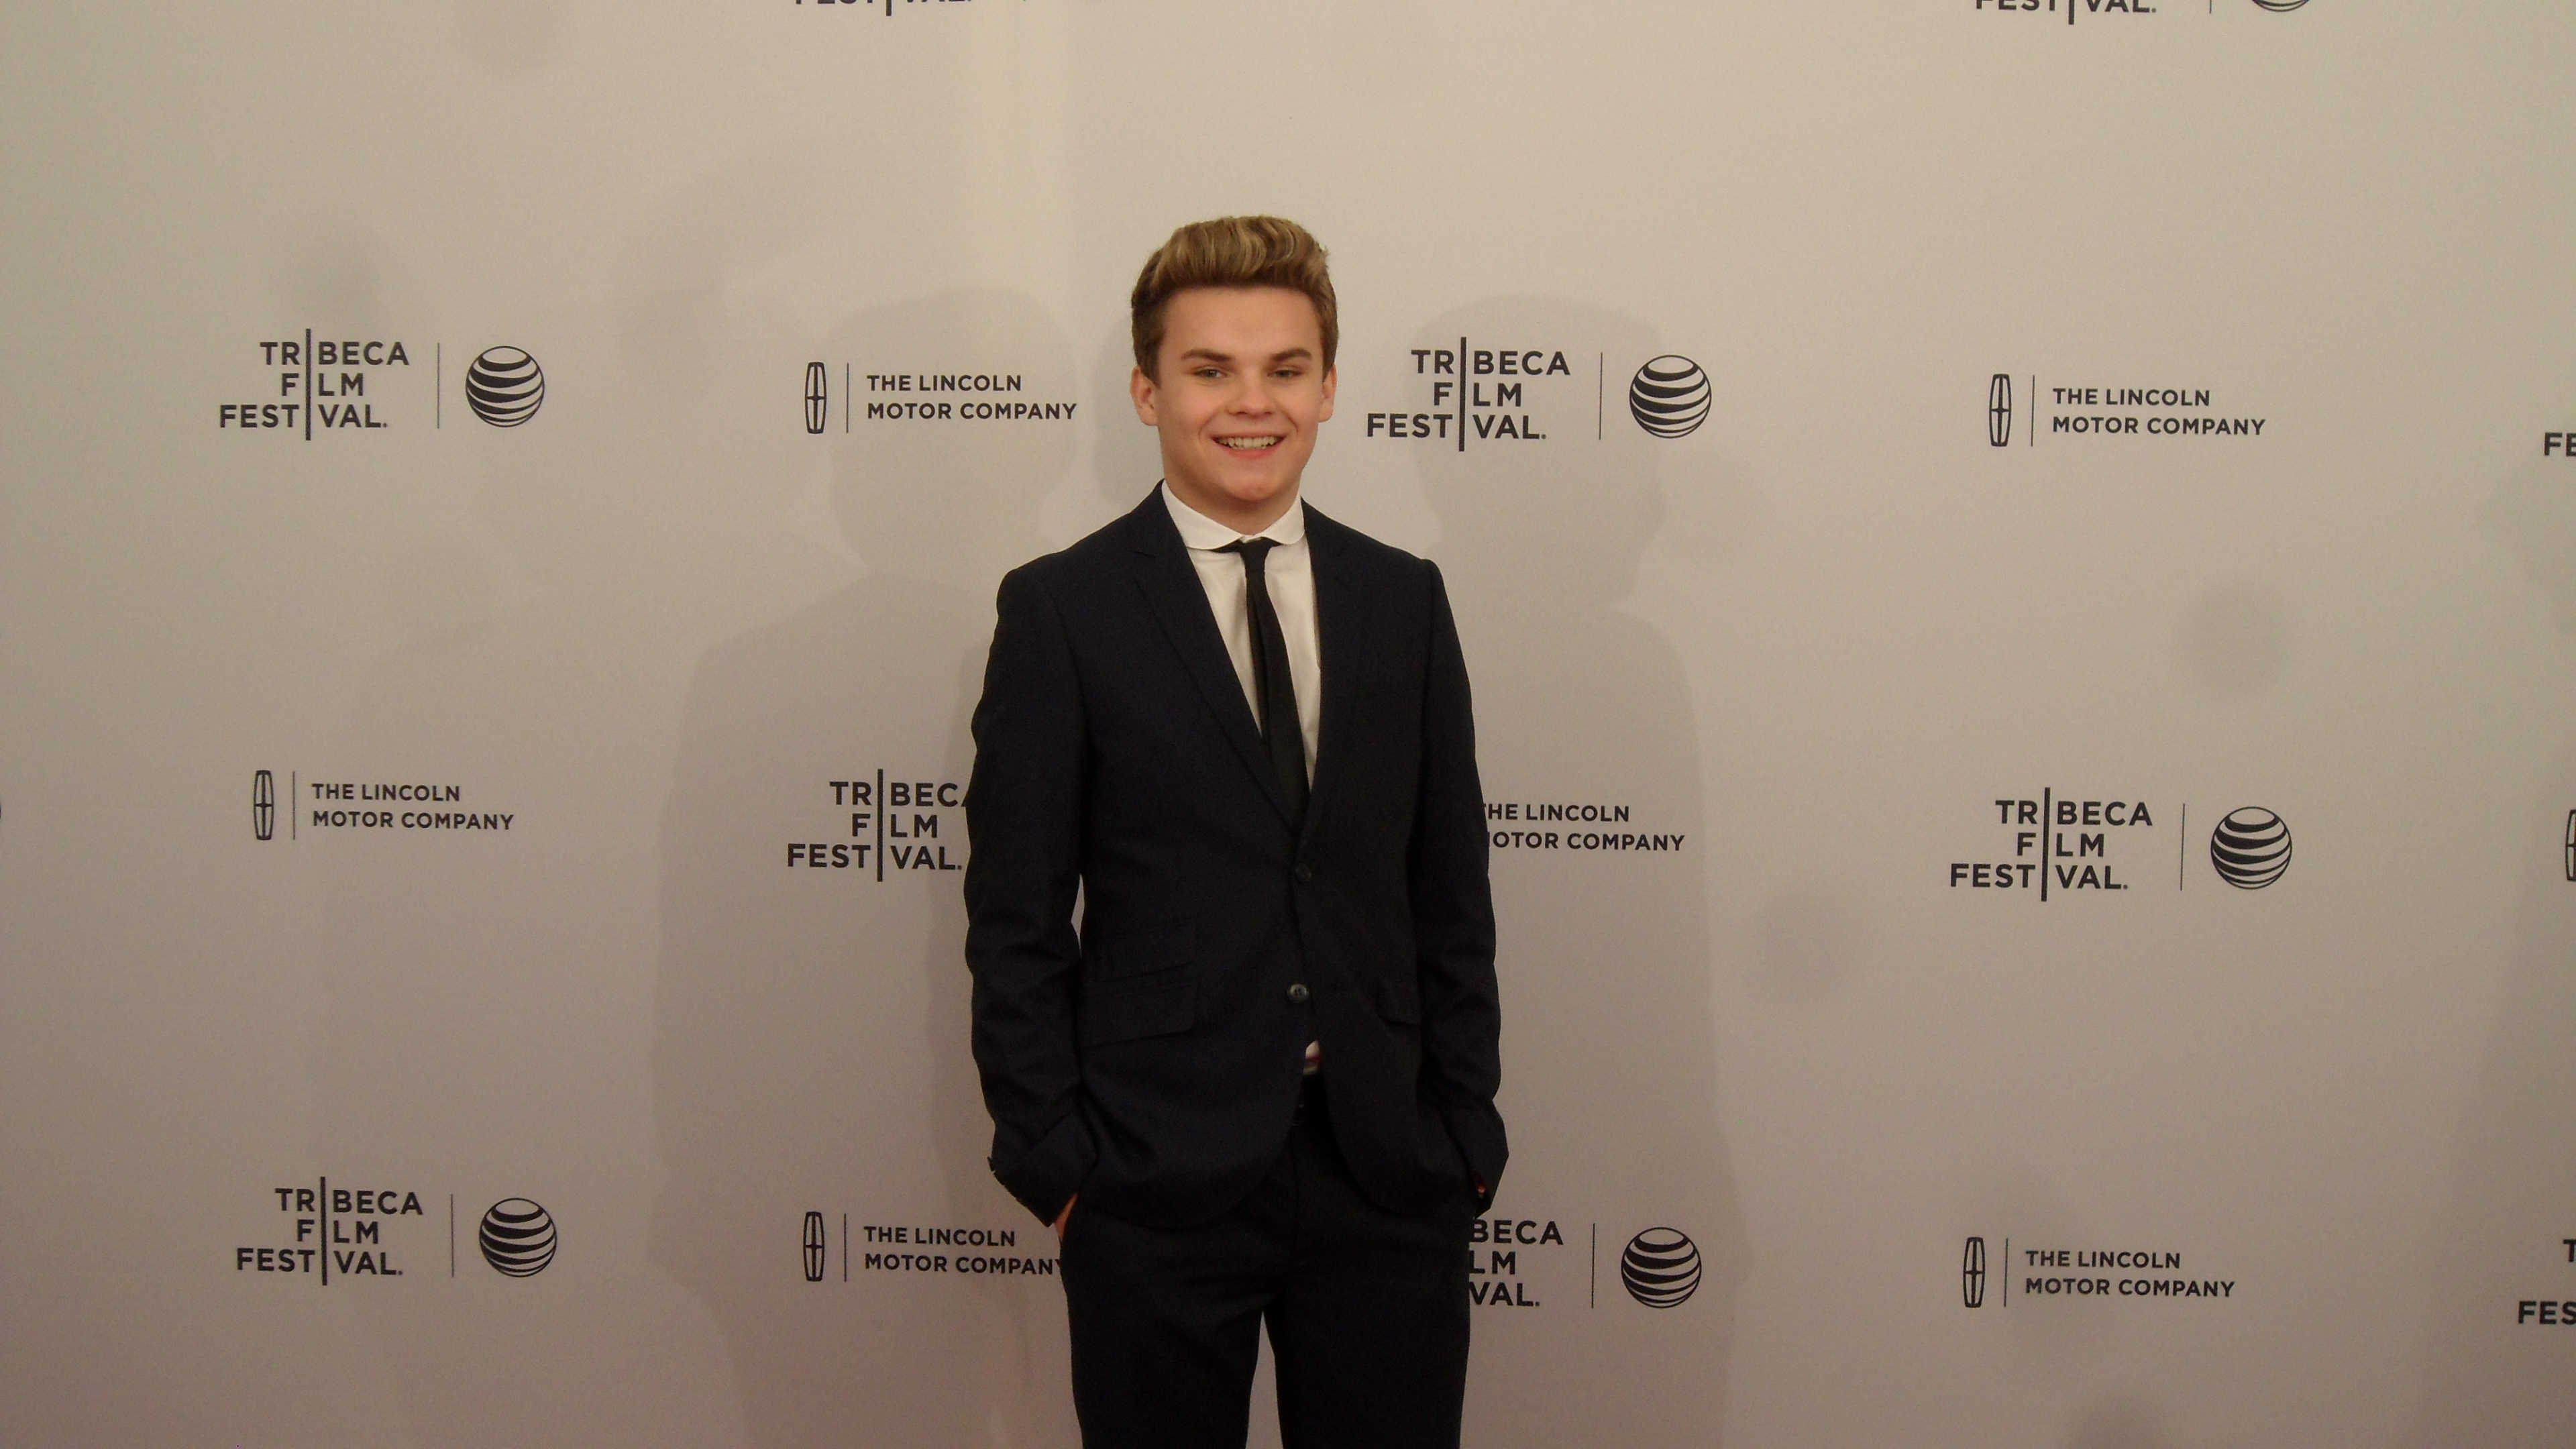 Ryan Hartwig at the premiere of Just Before I Go at the Tribeca Film Festival in New York on 24 April